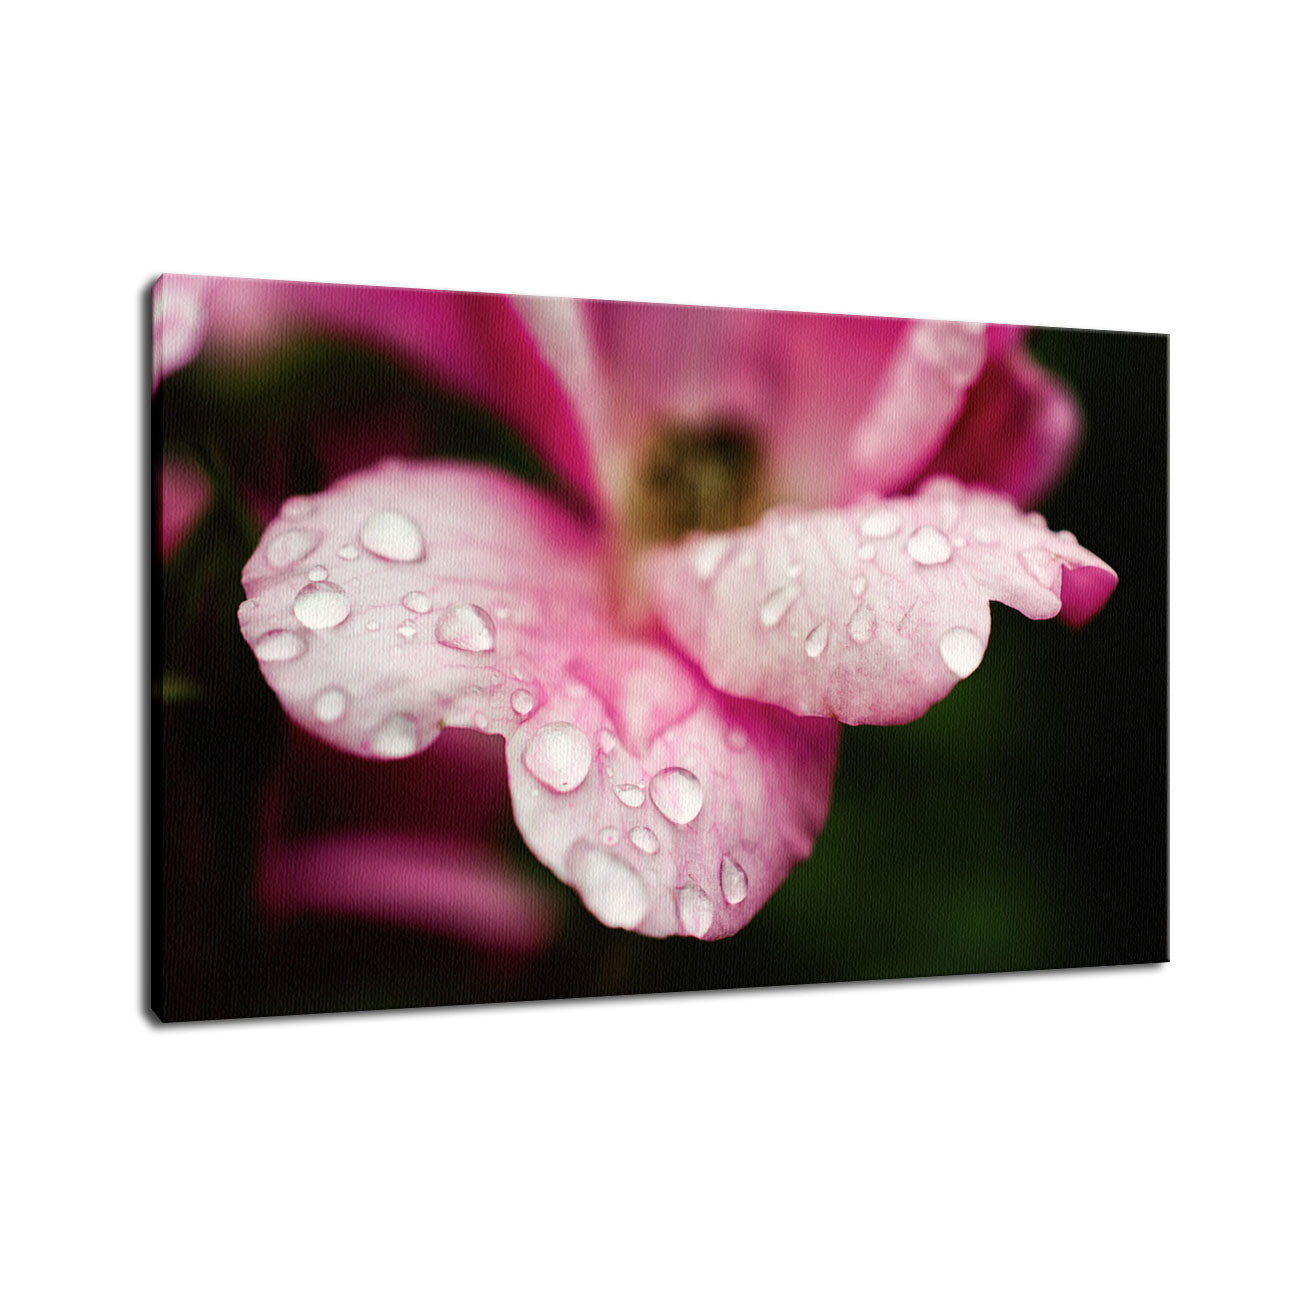 Raindrops on Wild Rose Nature / Floral Photo Fine Art Canvas Wall Art Prints  - PIPAFINEART